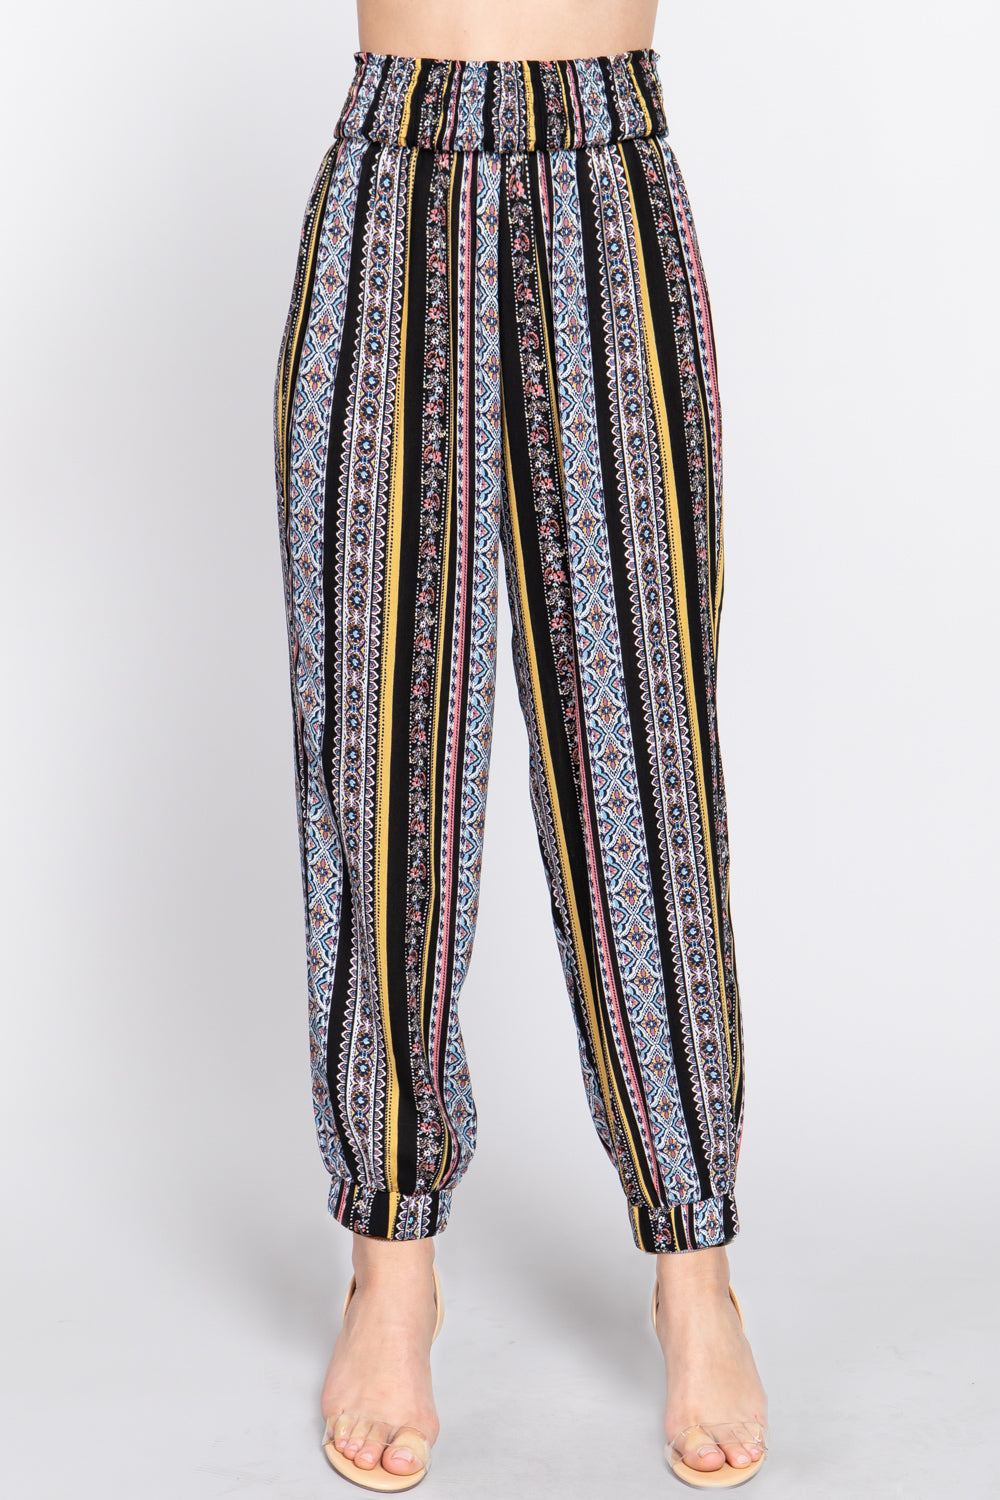 - Printed Jogger Pants - 2 styles - Ships from The US - womens joggers at TFC&H Co.